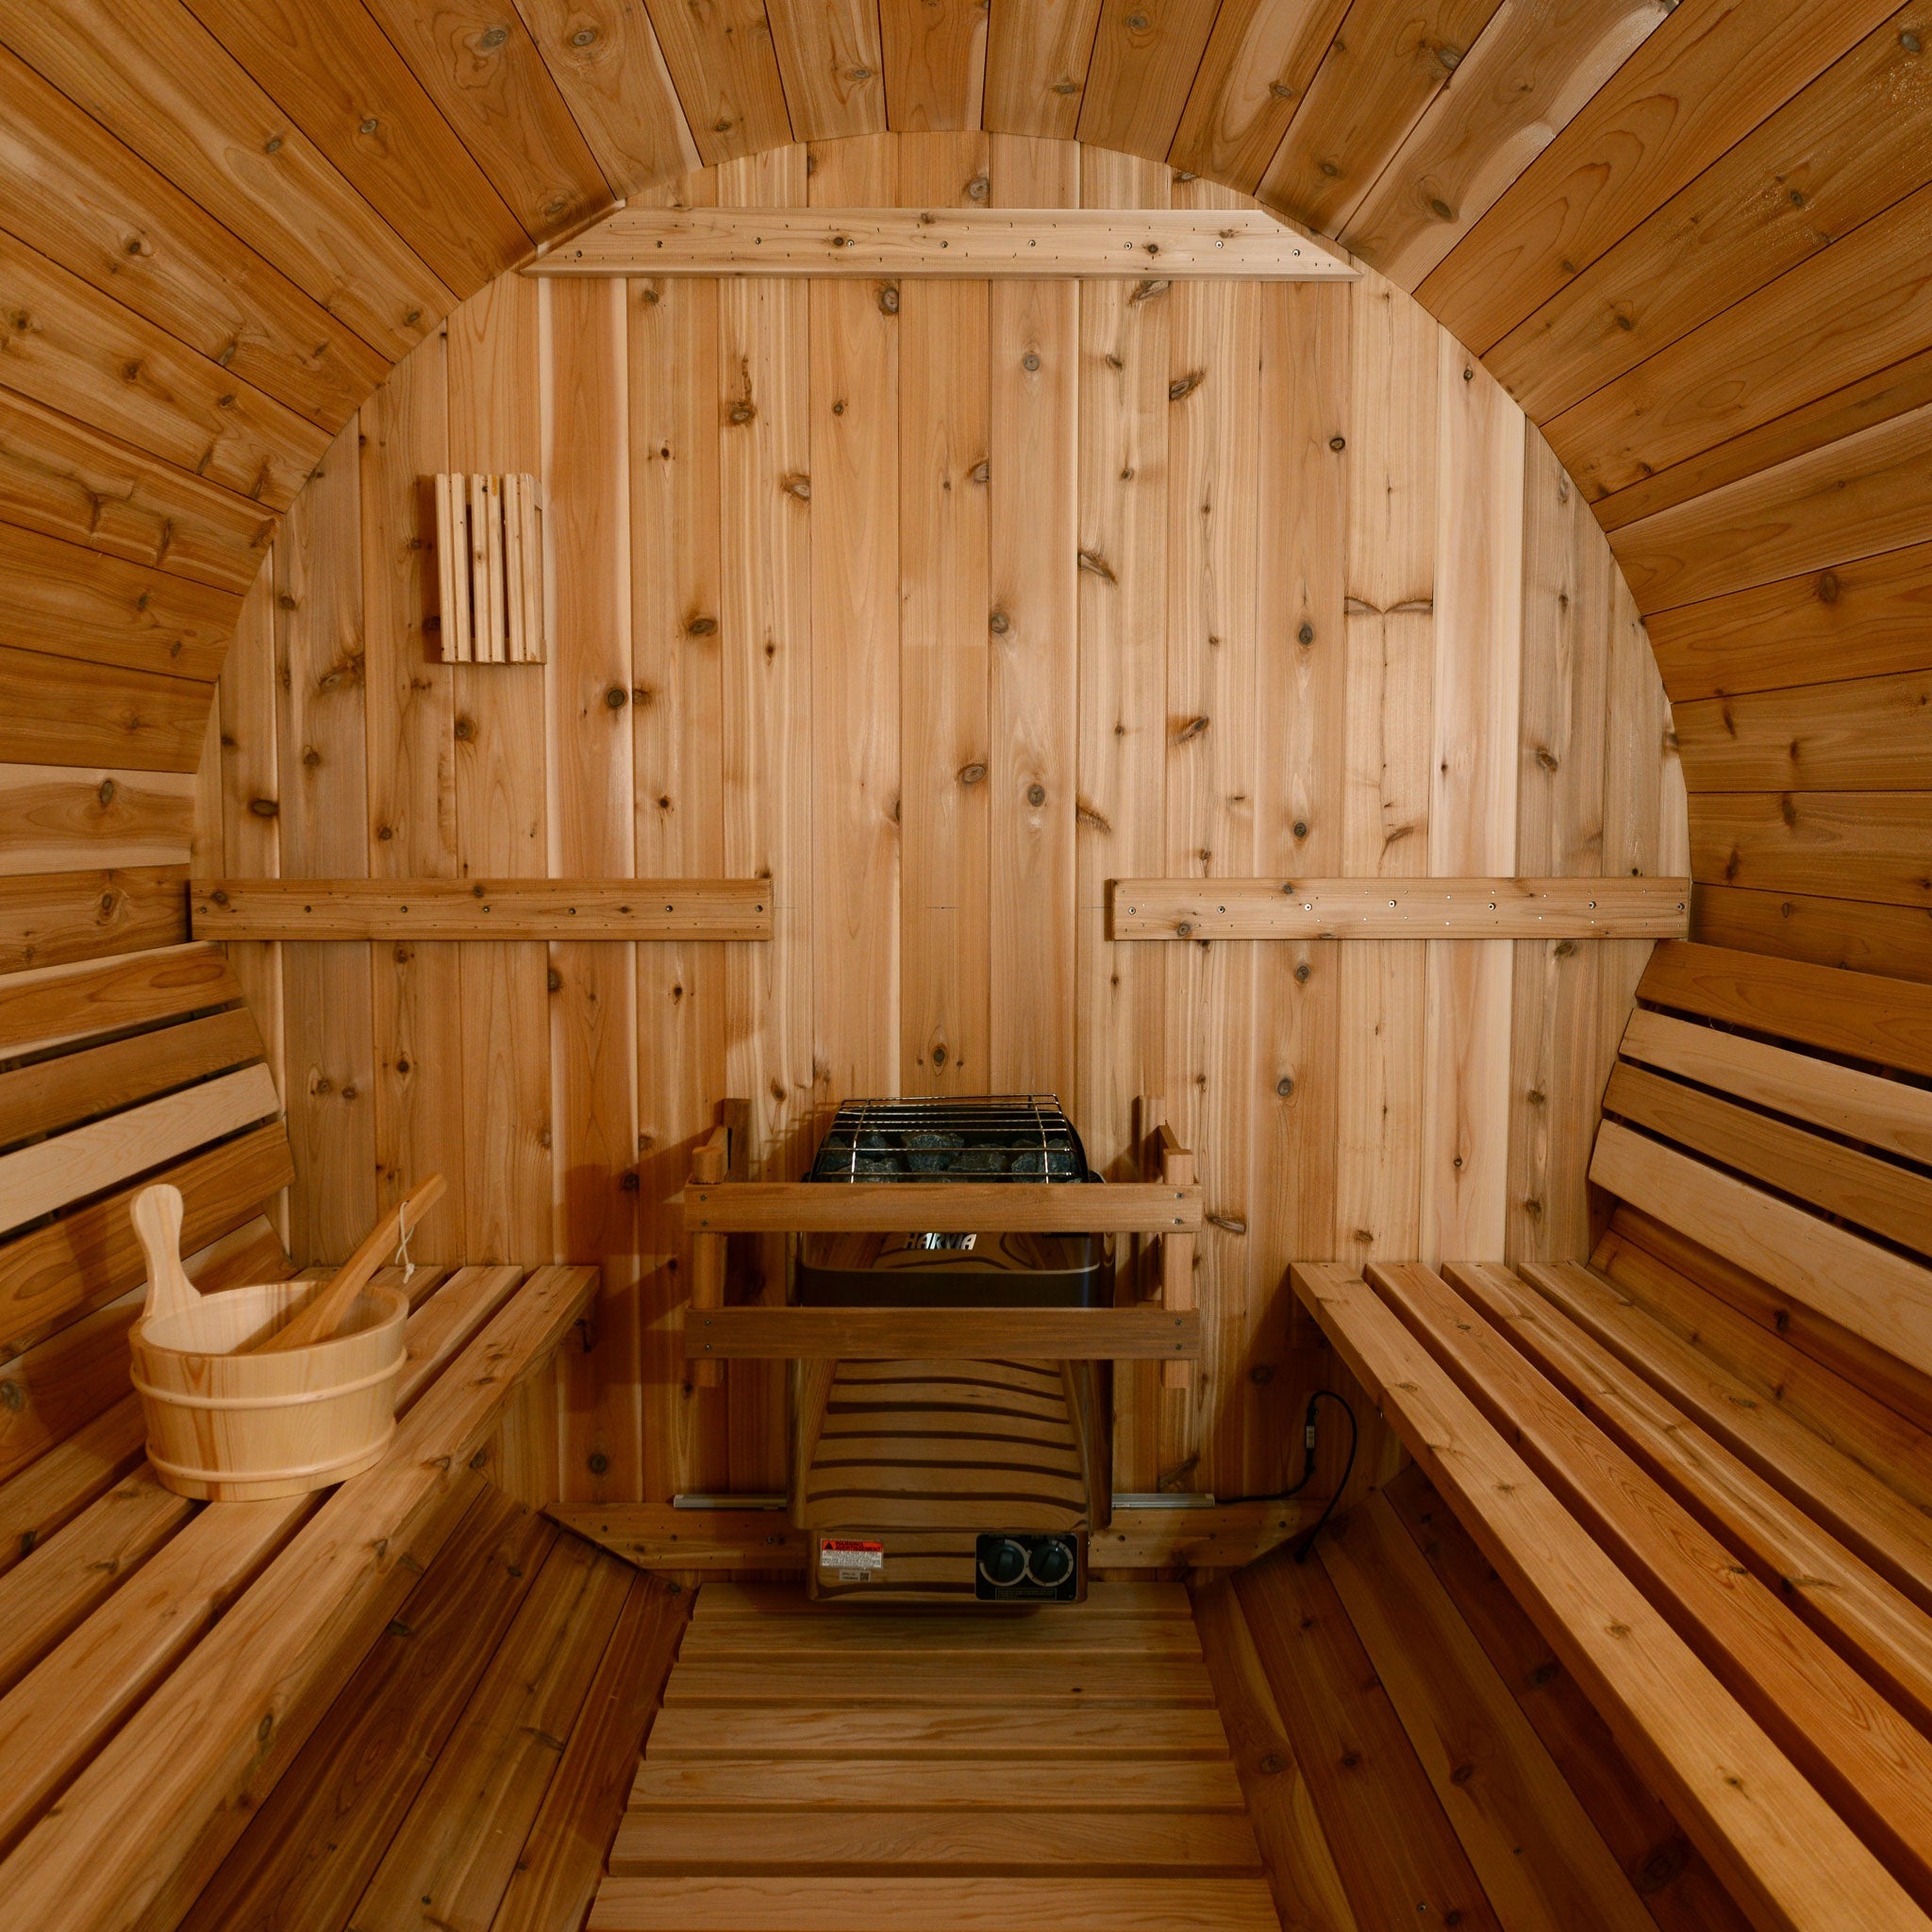 Audra 2-4 Person Canopy Barrel Sauna with Premium Cedar Wood and Integrated Ventilation System